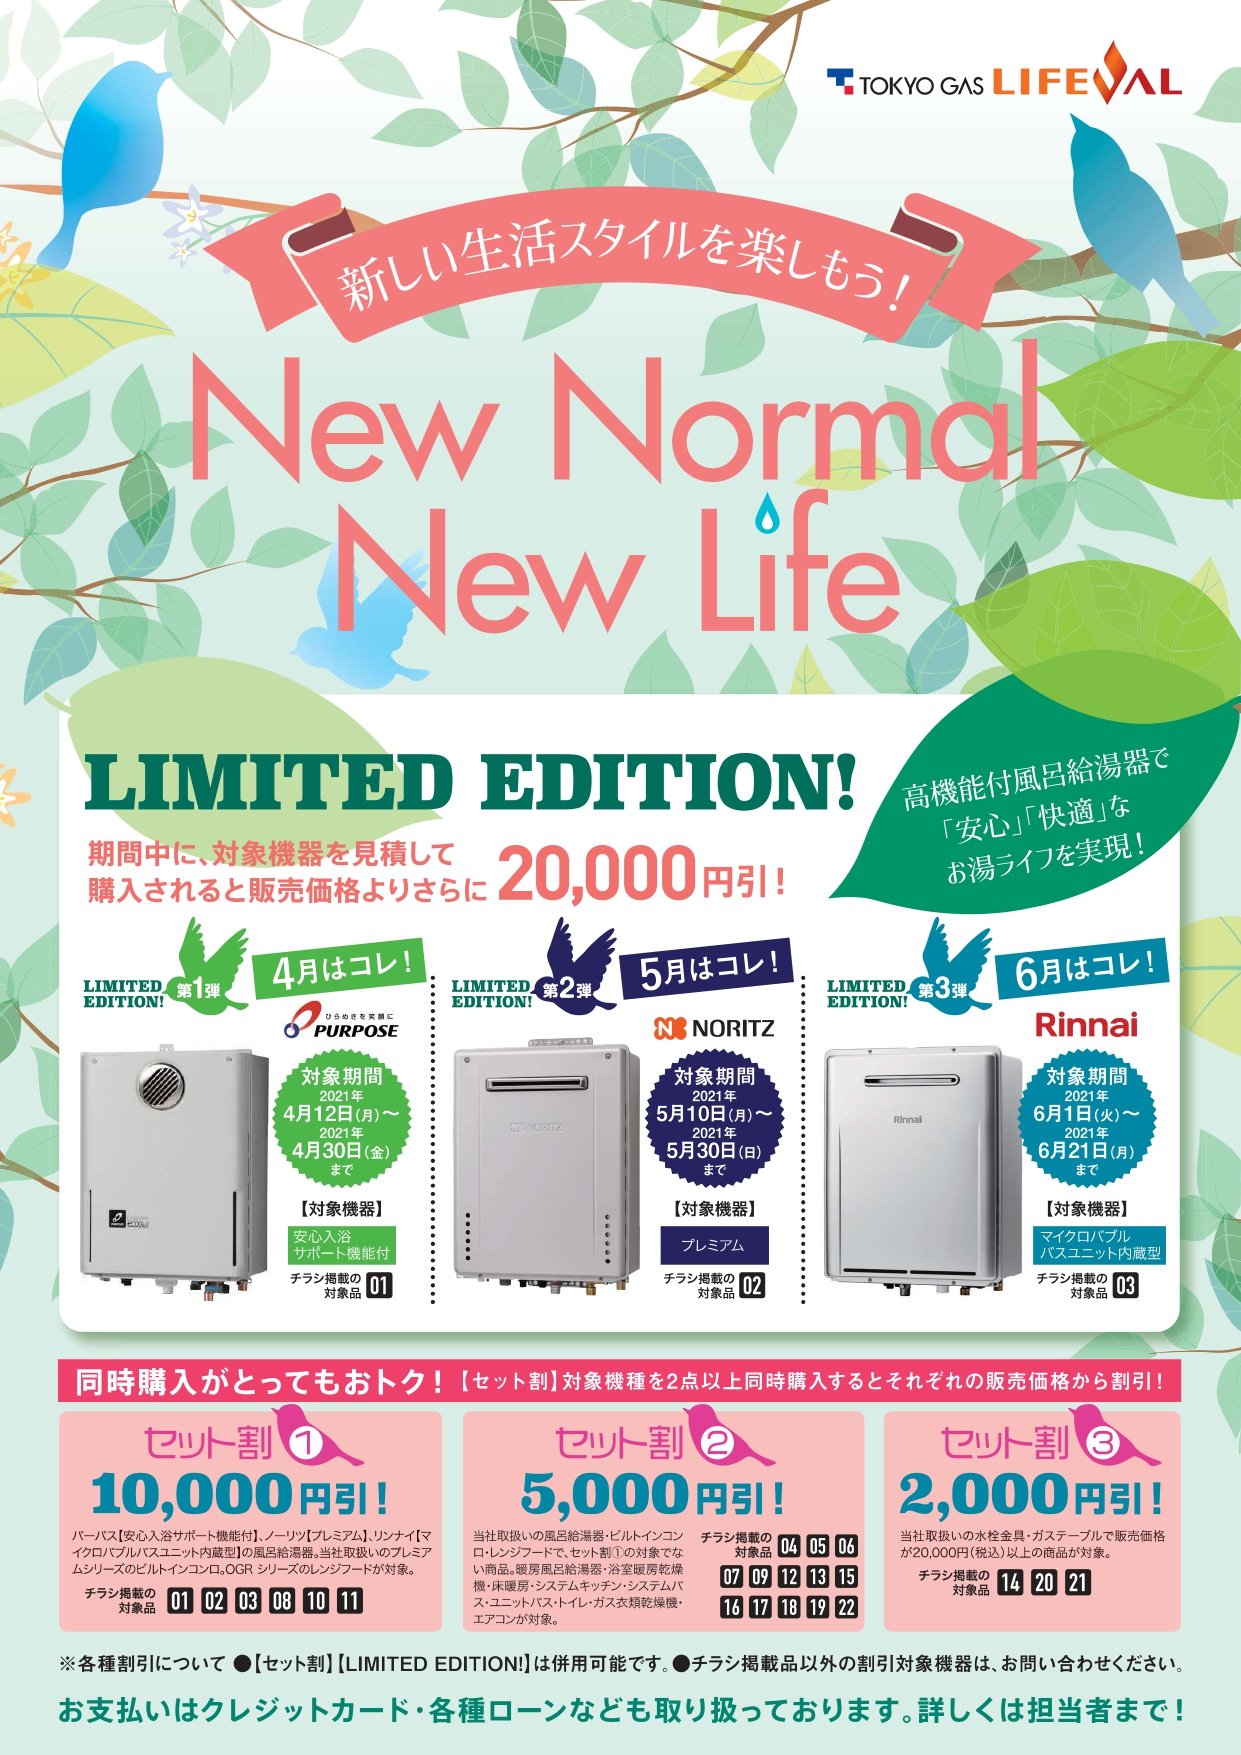 「New Normal New Life」実施！！